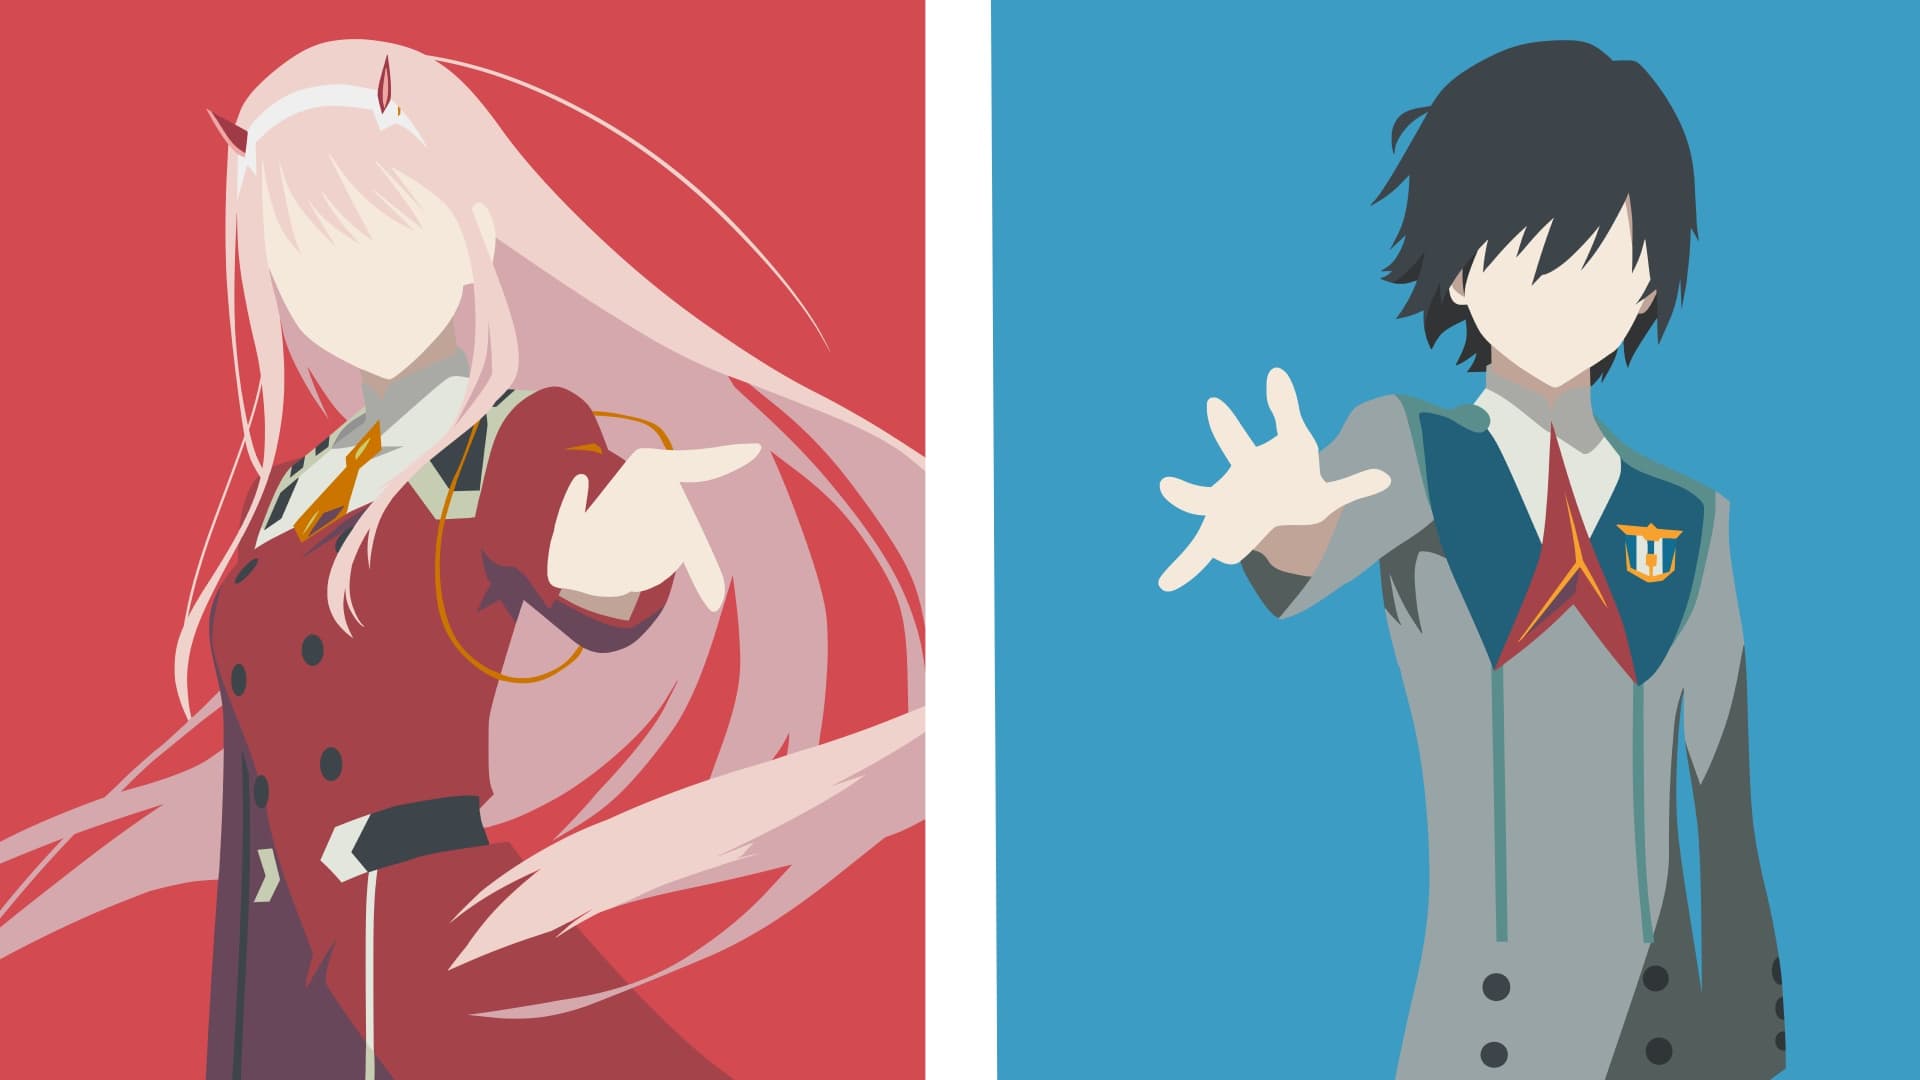 Wallpaper Of Anime, Darling In The Franxx, Hiro, Minimalist - Darling In The Franxx Hiro , HD Wallpaper & Backgrounds